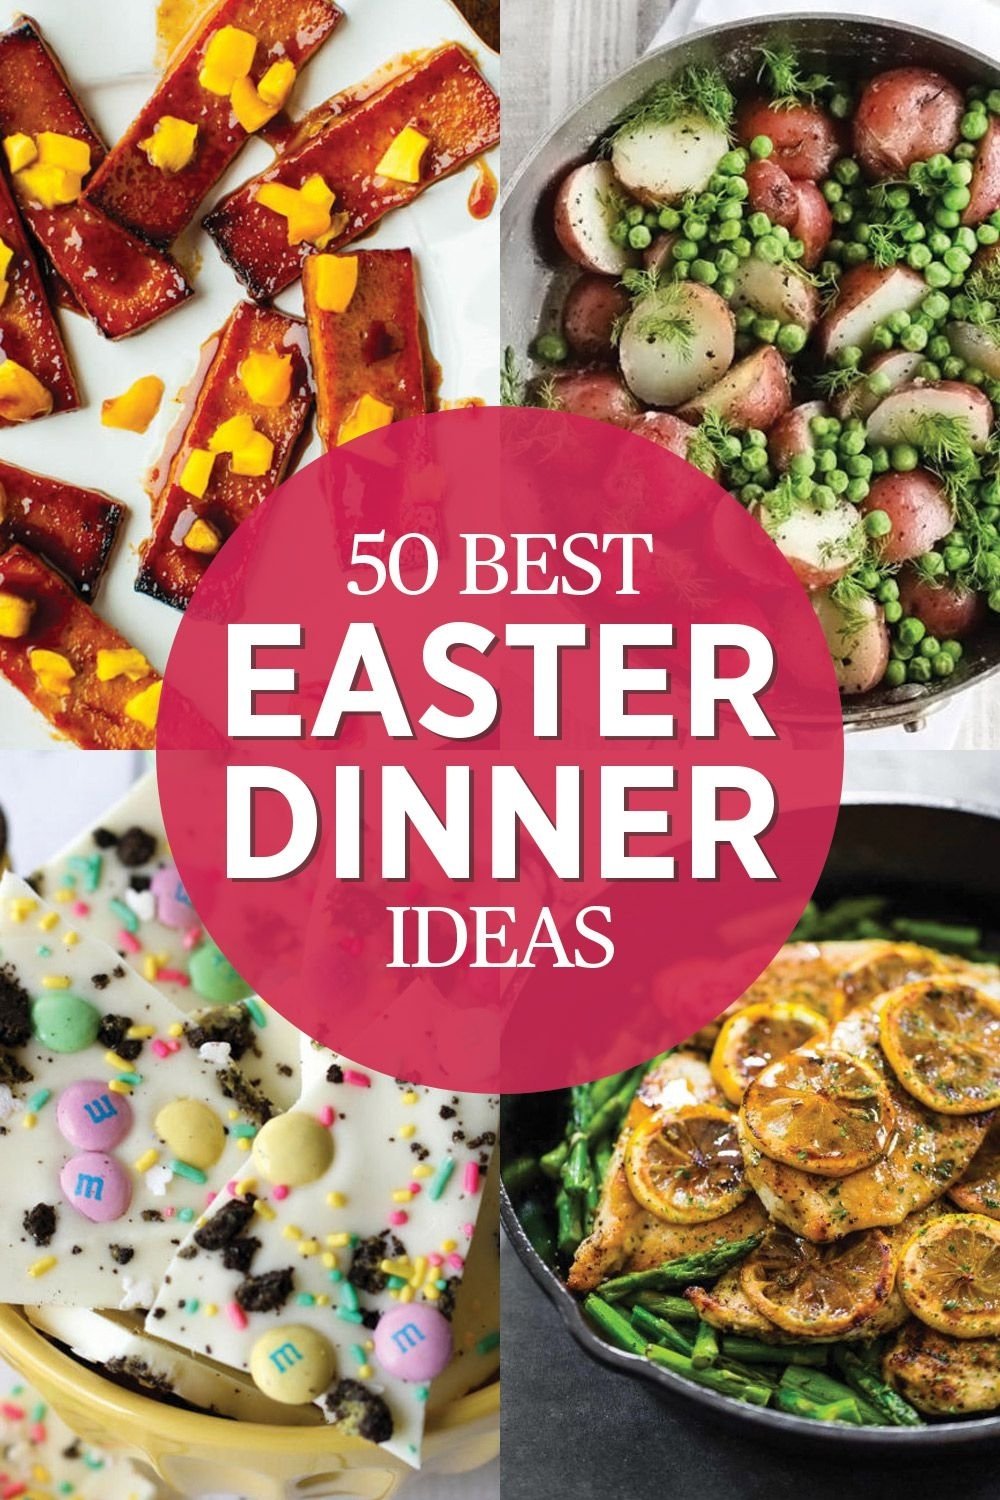 Top 24 Easter Dinner Menus Ideas Best Round Up Recipe Collections